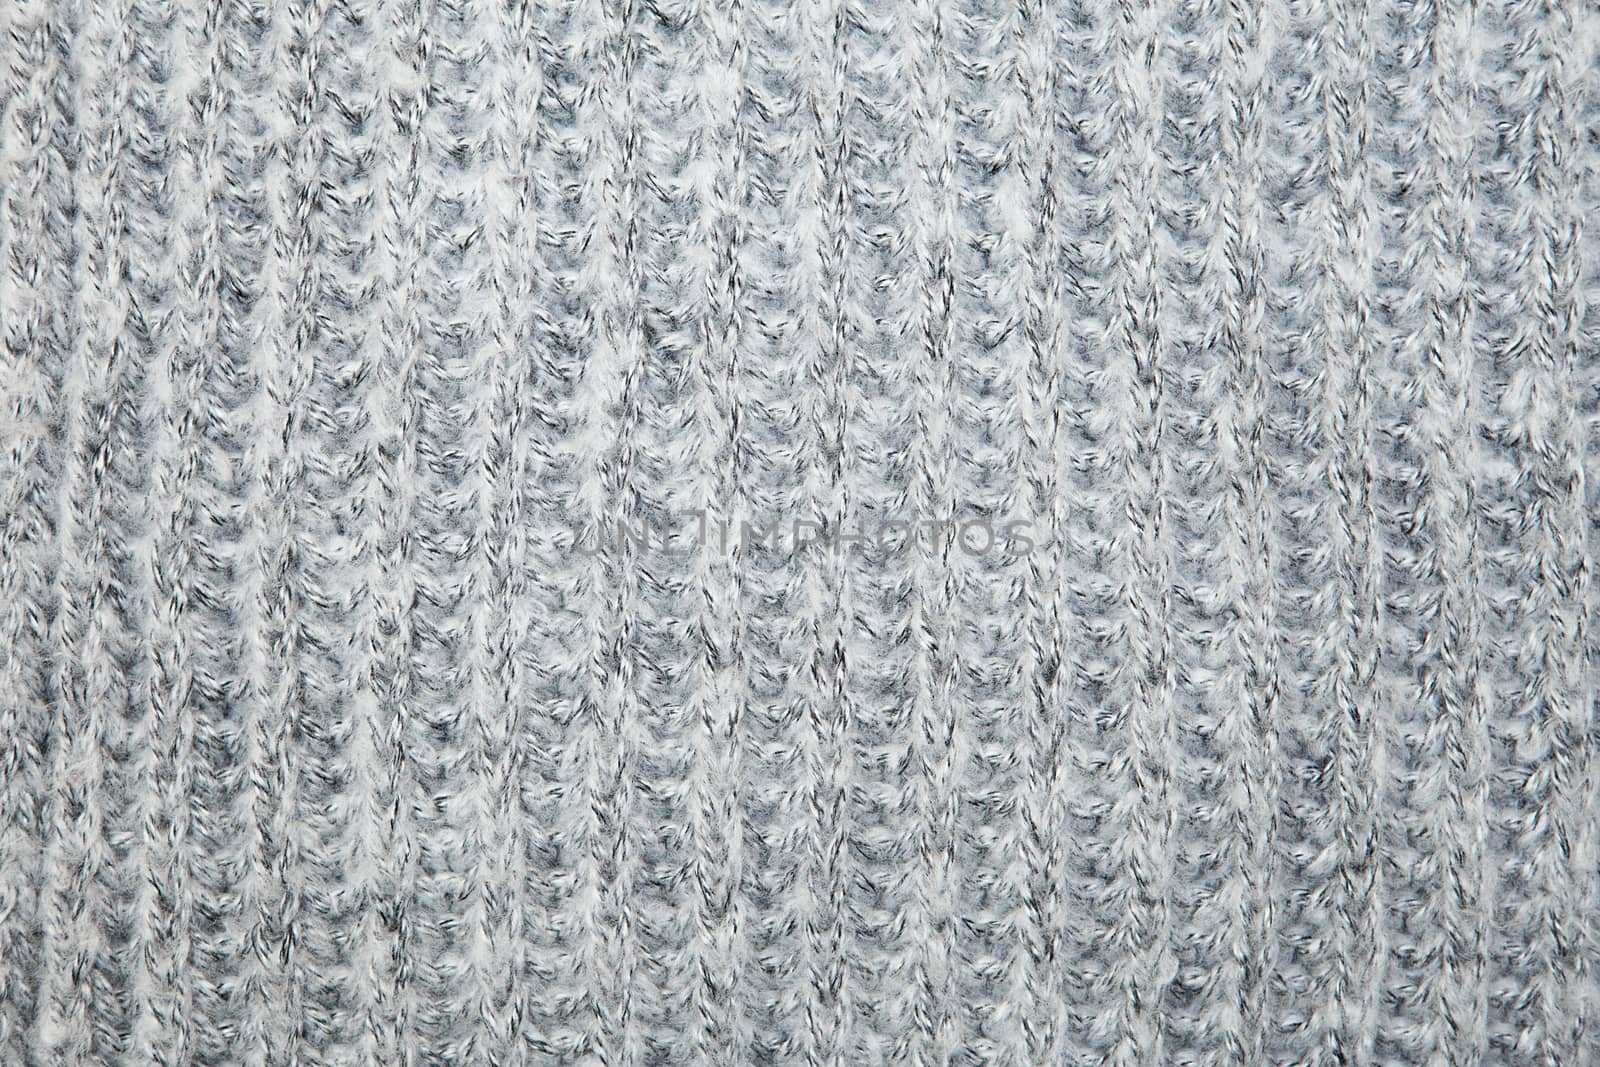 Close up on knit woolen fur texture. Gray melange fluffy woven thread sweater or scarf as a background.